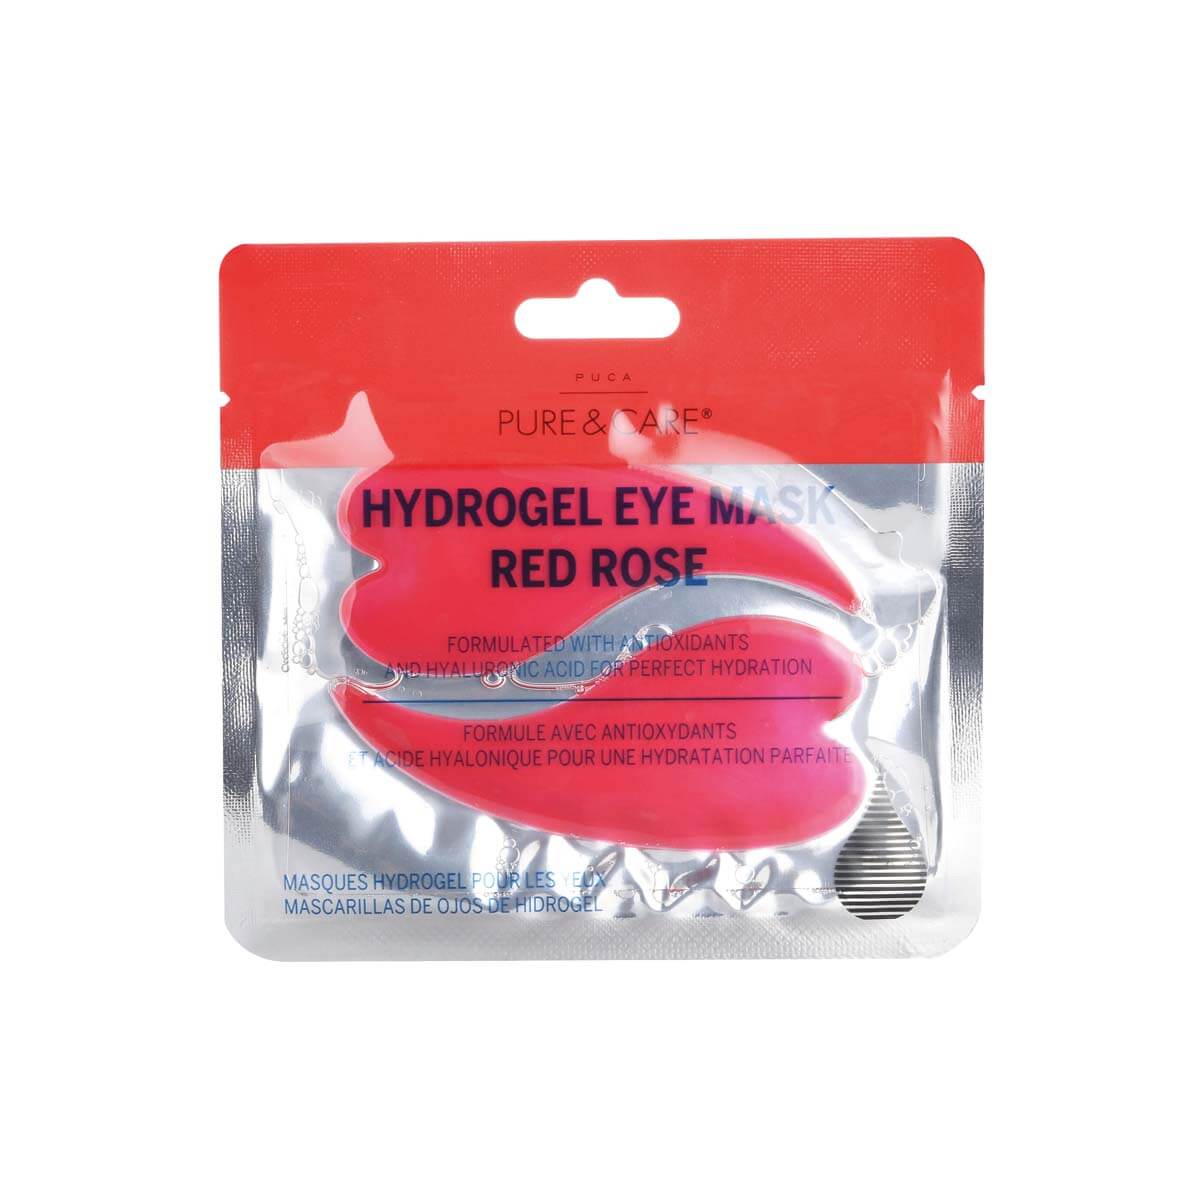 Hydrogel Eye Mask Red Rose | PUCA - PURE & CARE